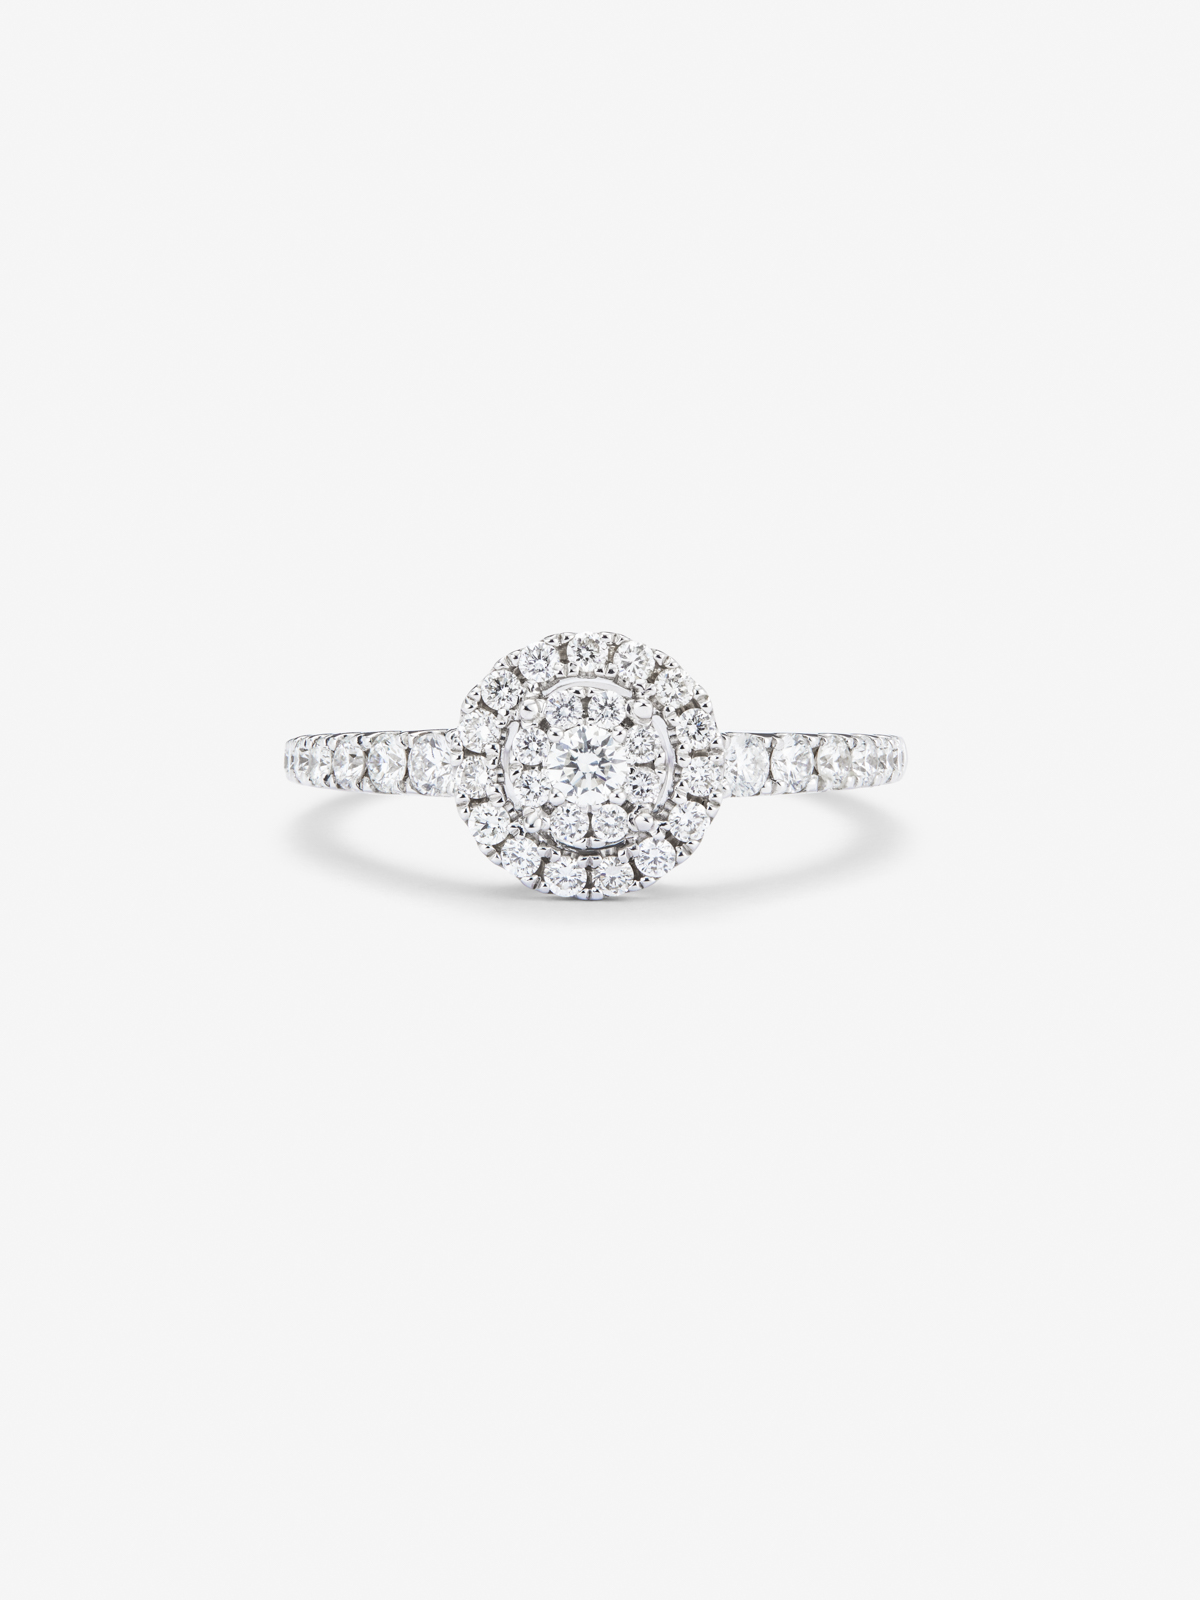 18K white gold ring with a halo of pavé diamonds